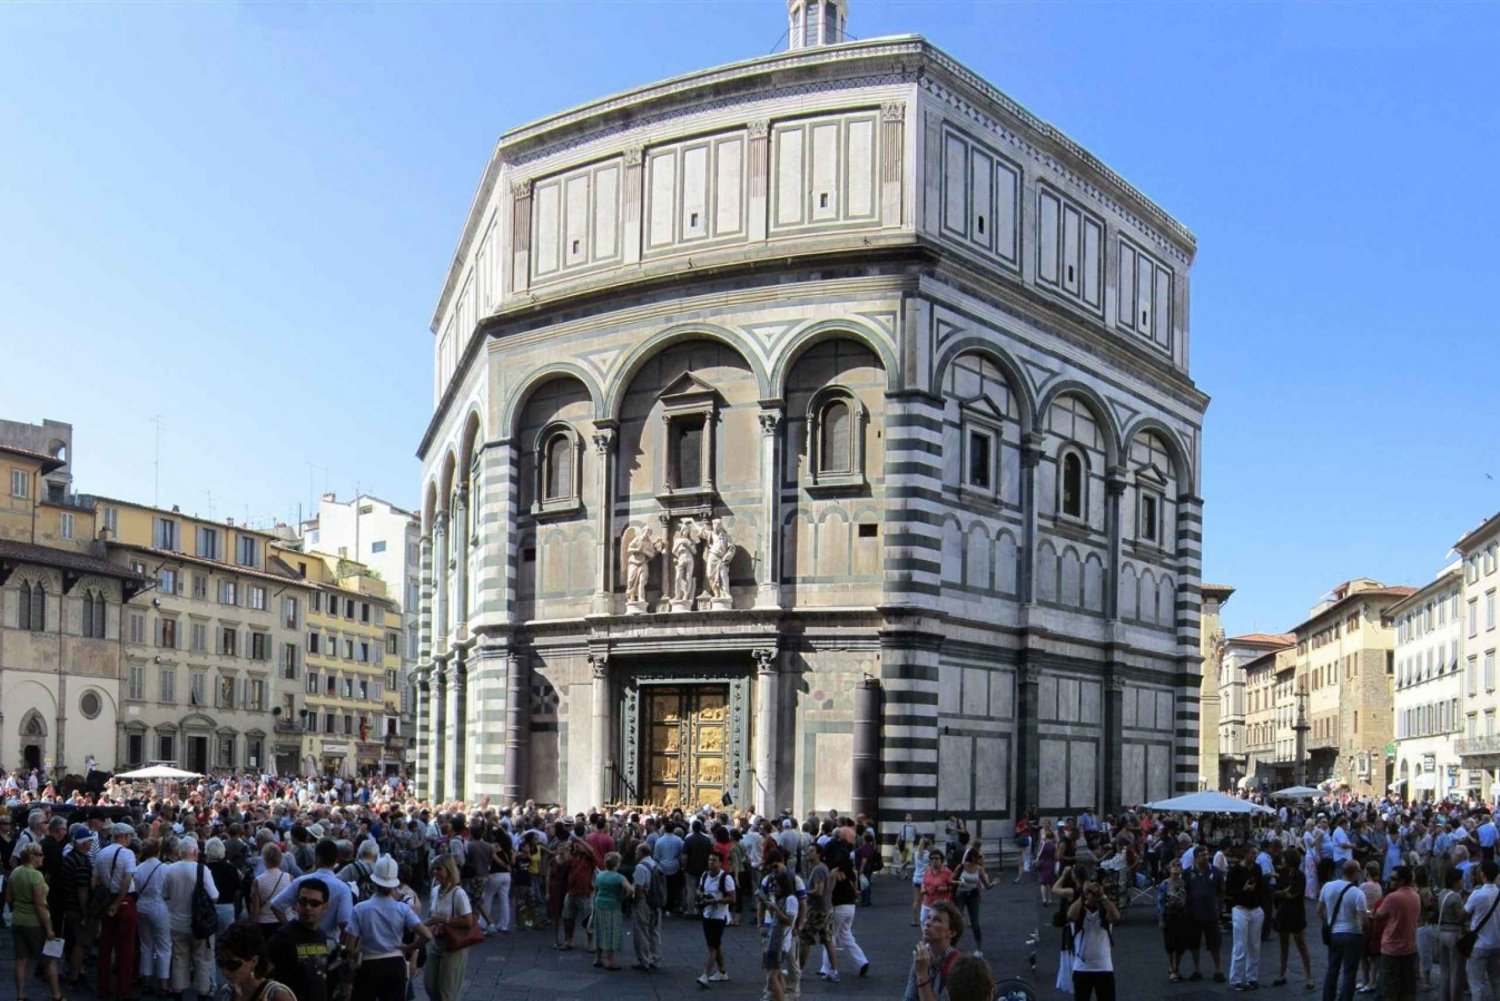 From Rome: Florence and Pisa Private Day Tour